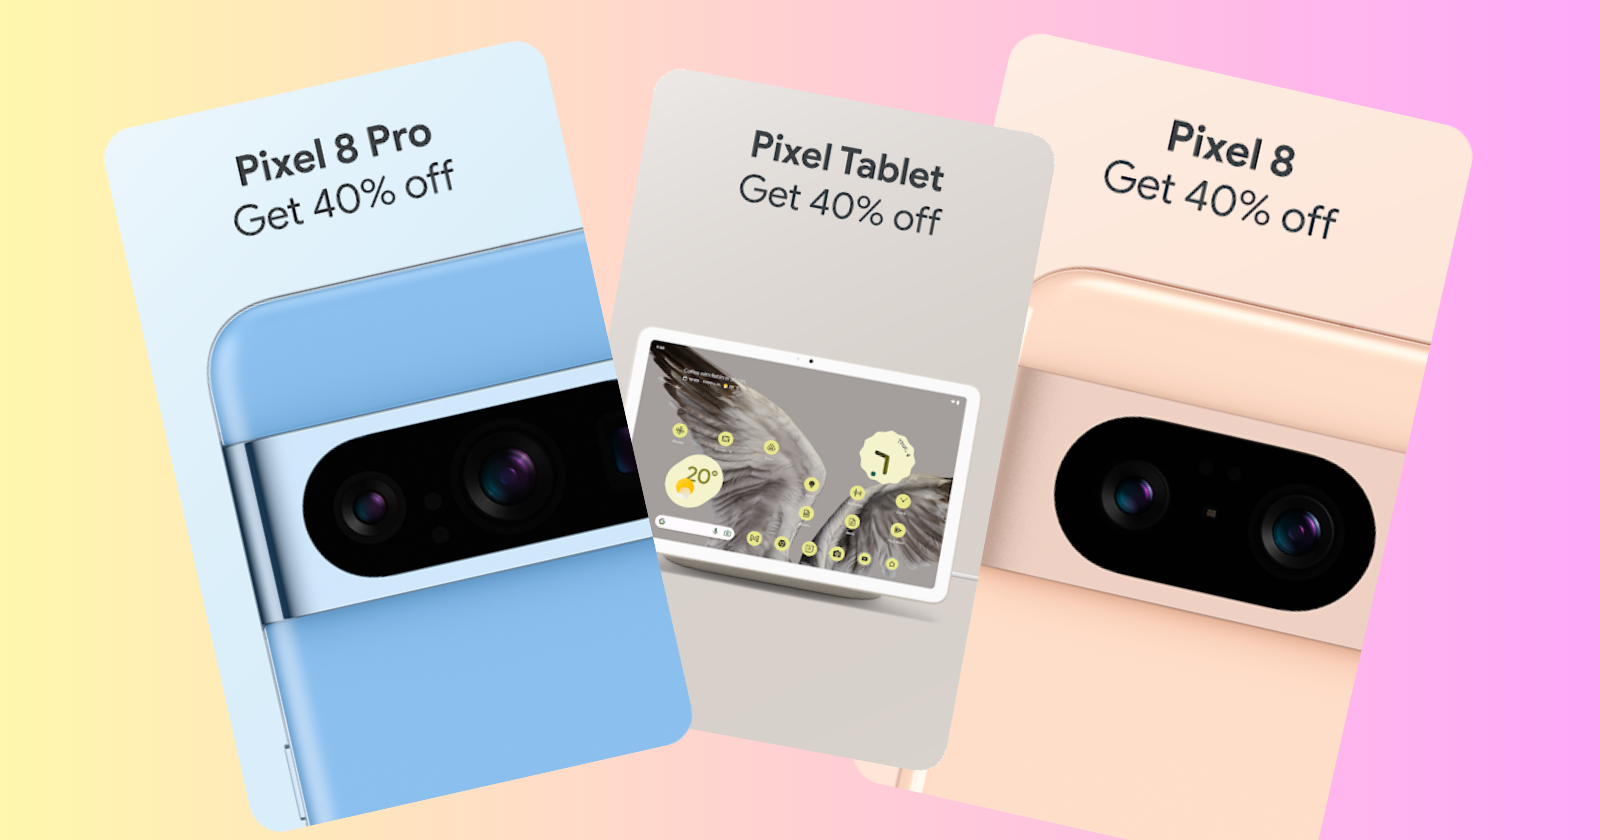 Get the Pixel 8, Pixel 8 Pro, or Pixel Tablet for 40% off with new Google Play Points offer